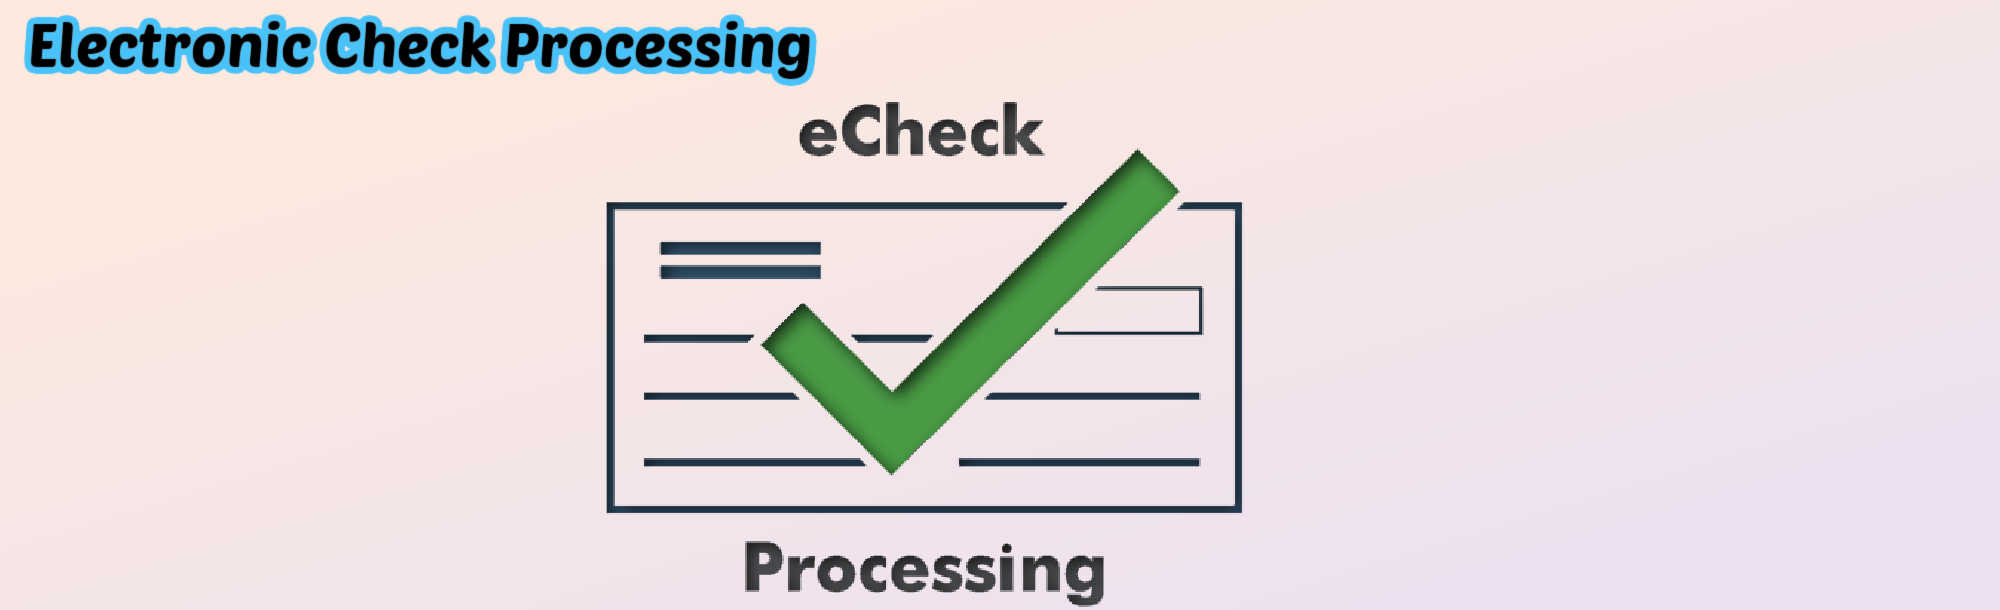 image of electronic check processing